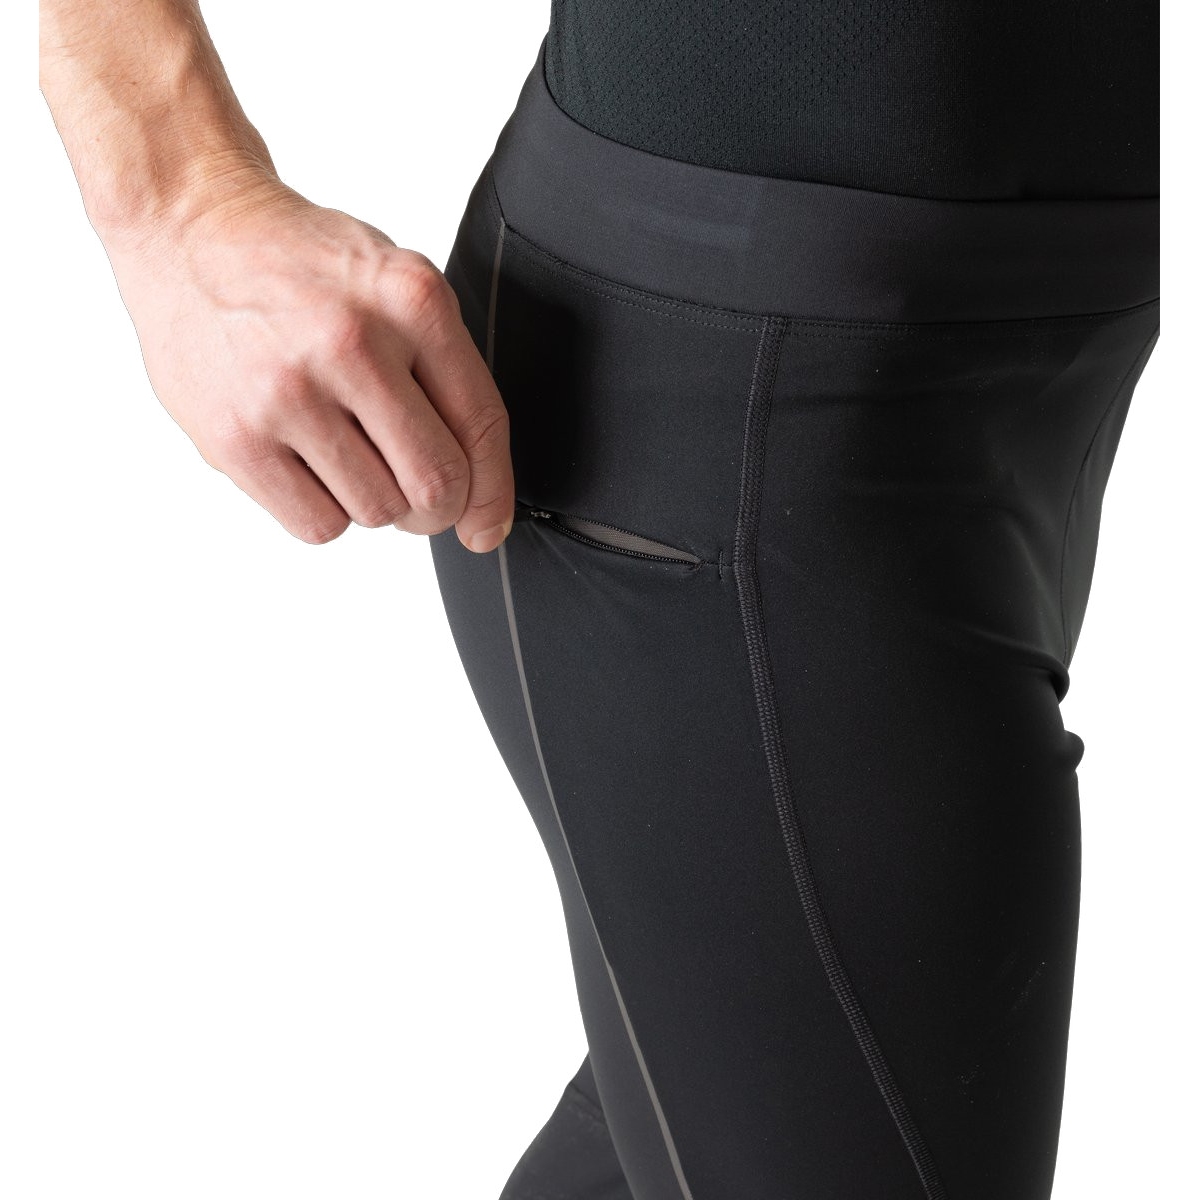  Odlo Men's Essential Run Tights, Black, Small : Clothing,  Shoes & Jewelry